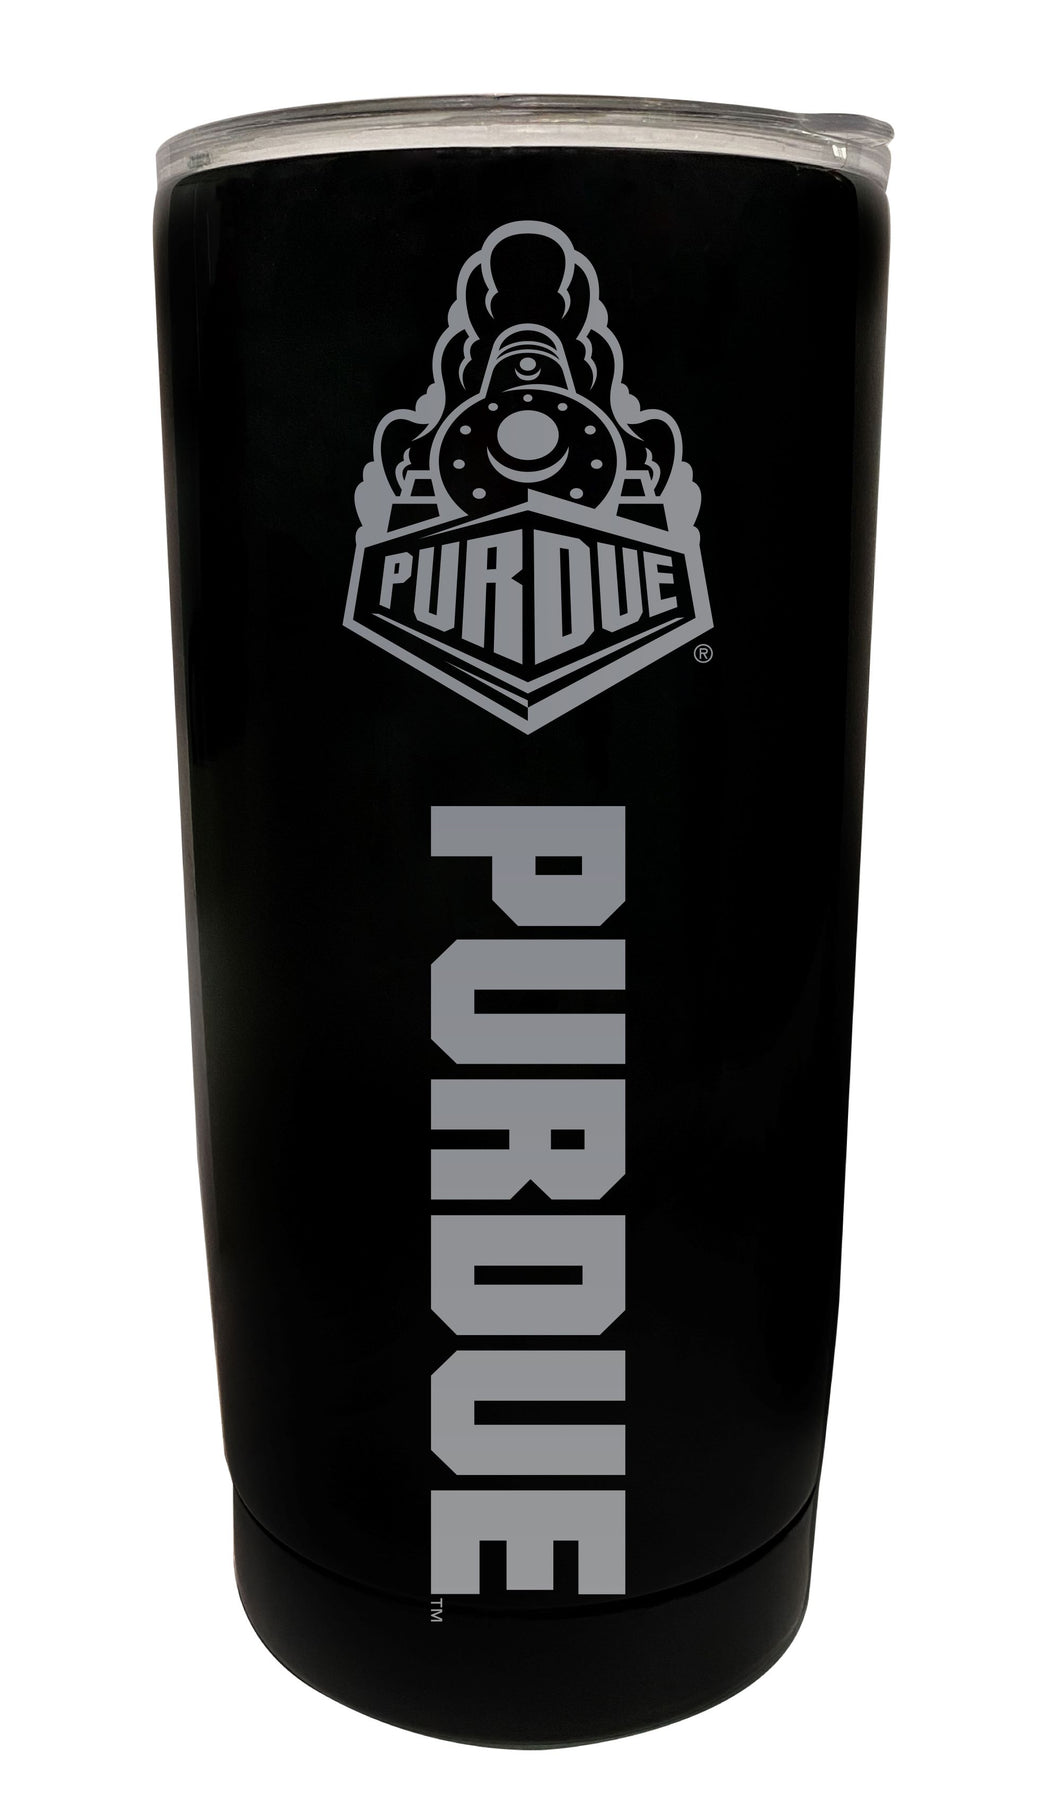 Purdue Boilermakers 16 oz Stainless Steel Etched Tumbler - Choose Your Color